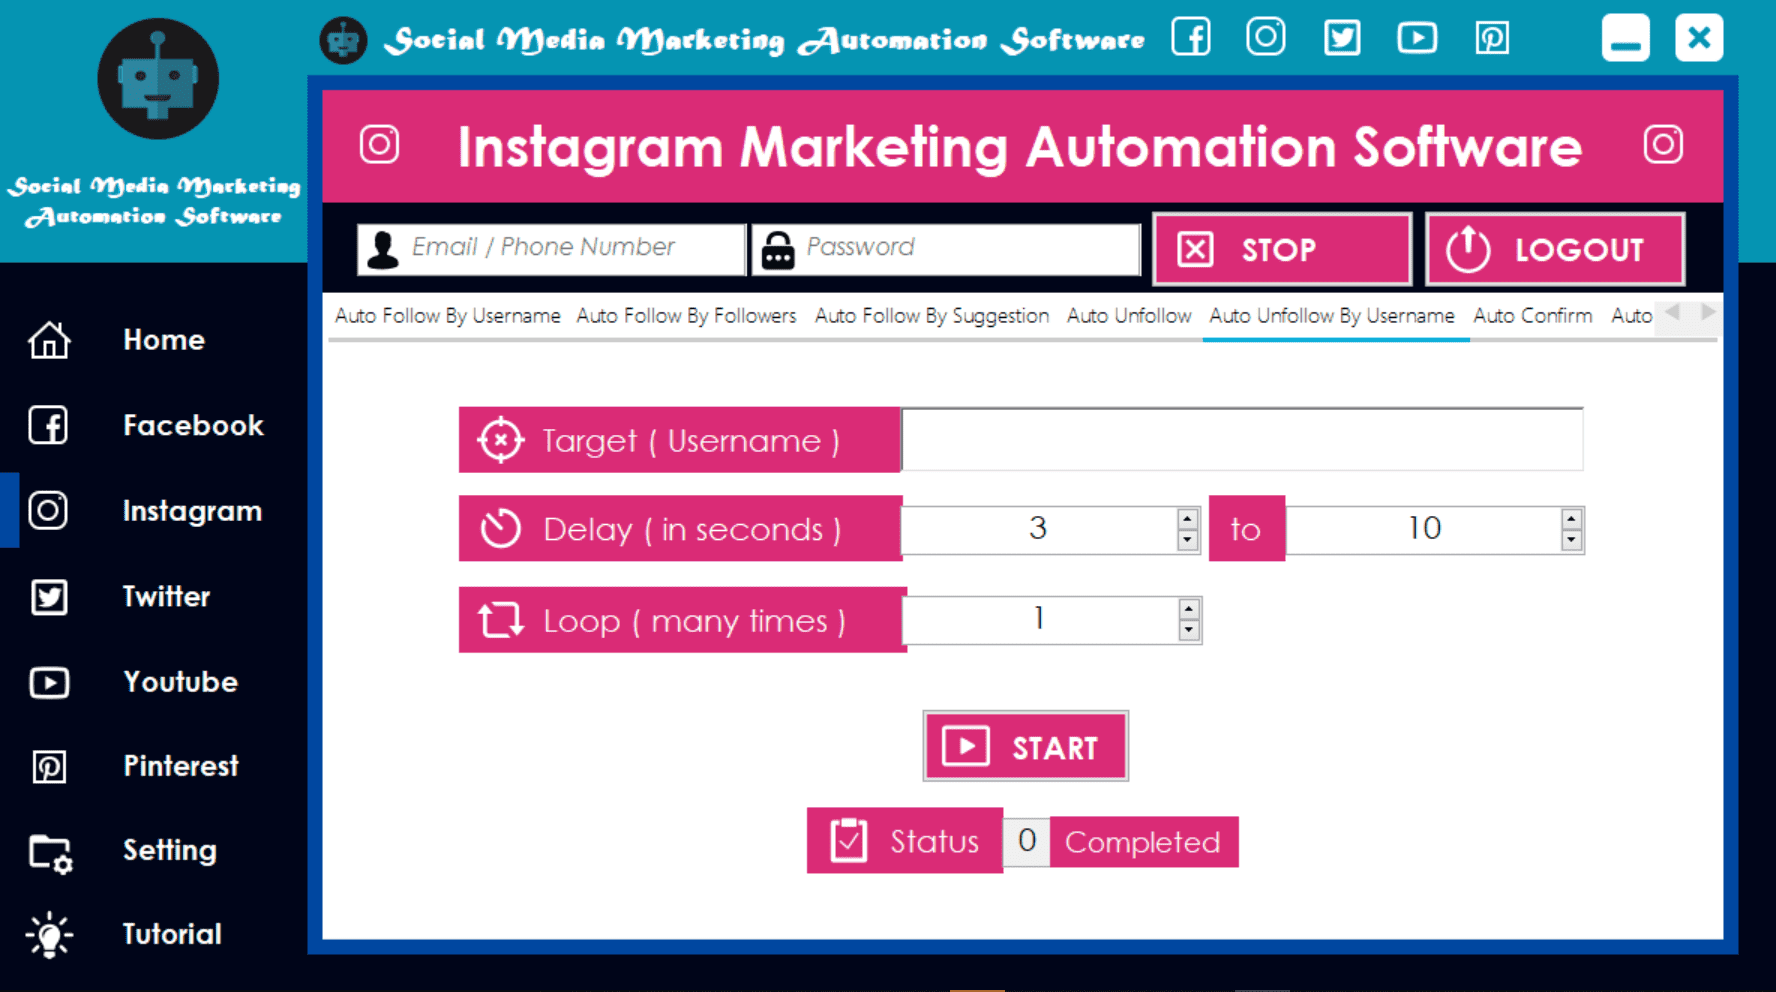 Auto Unfollow By Username